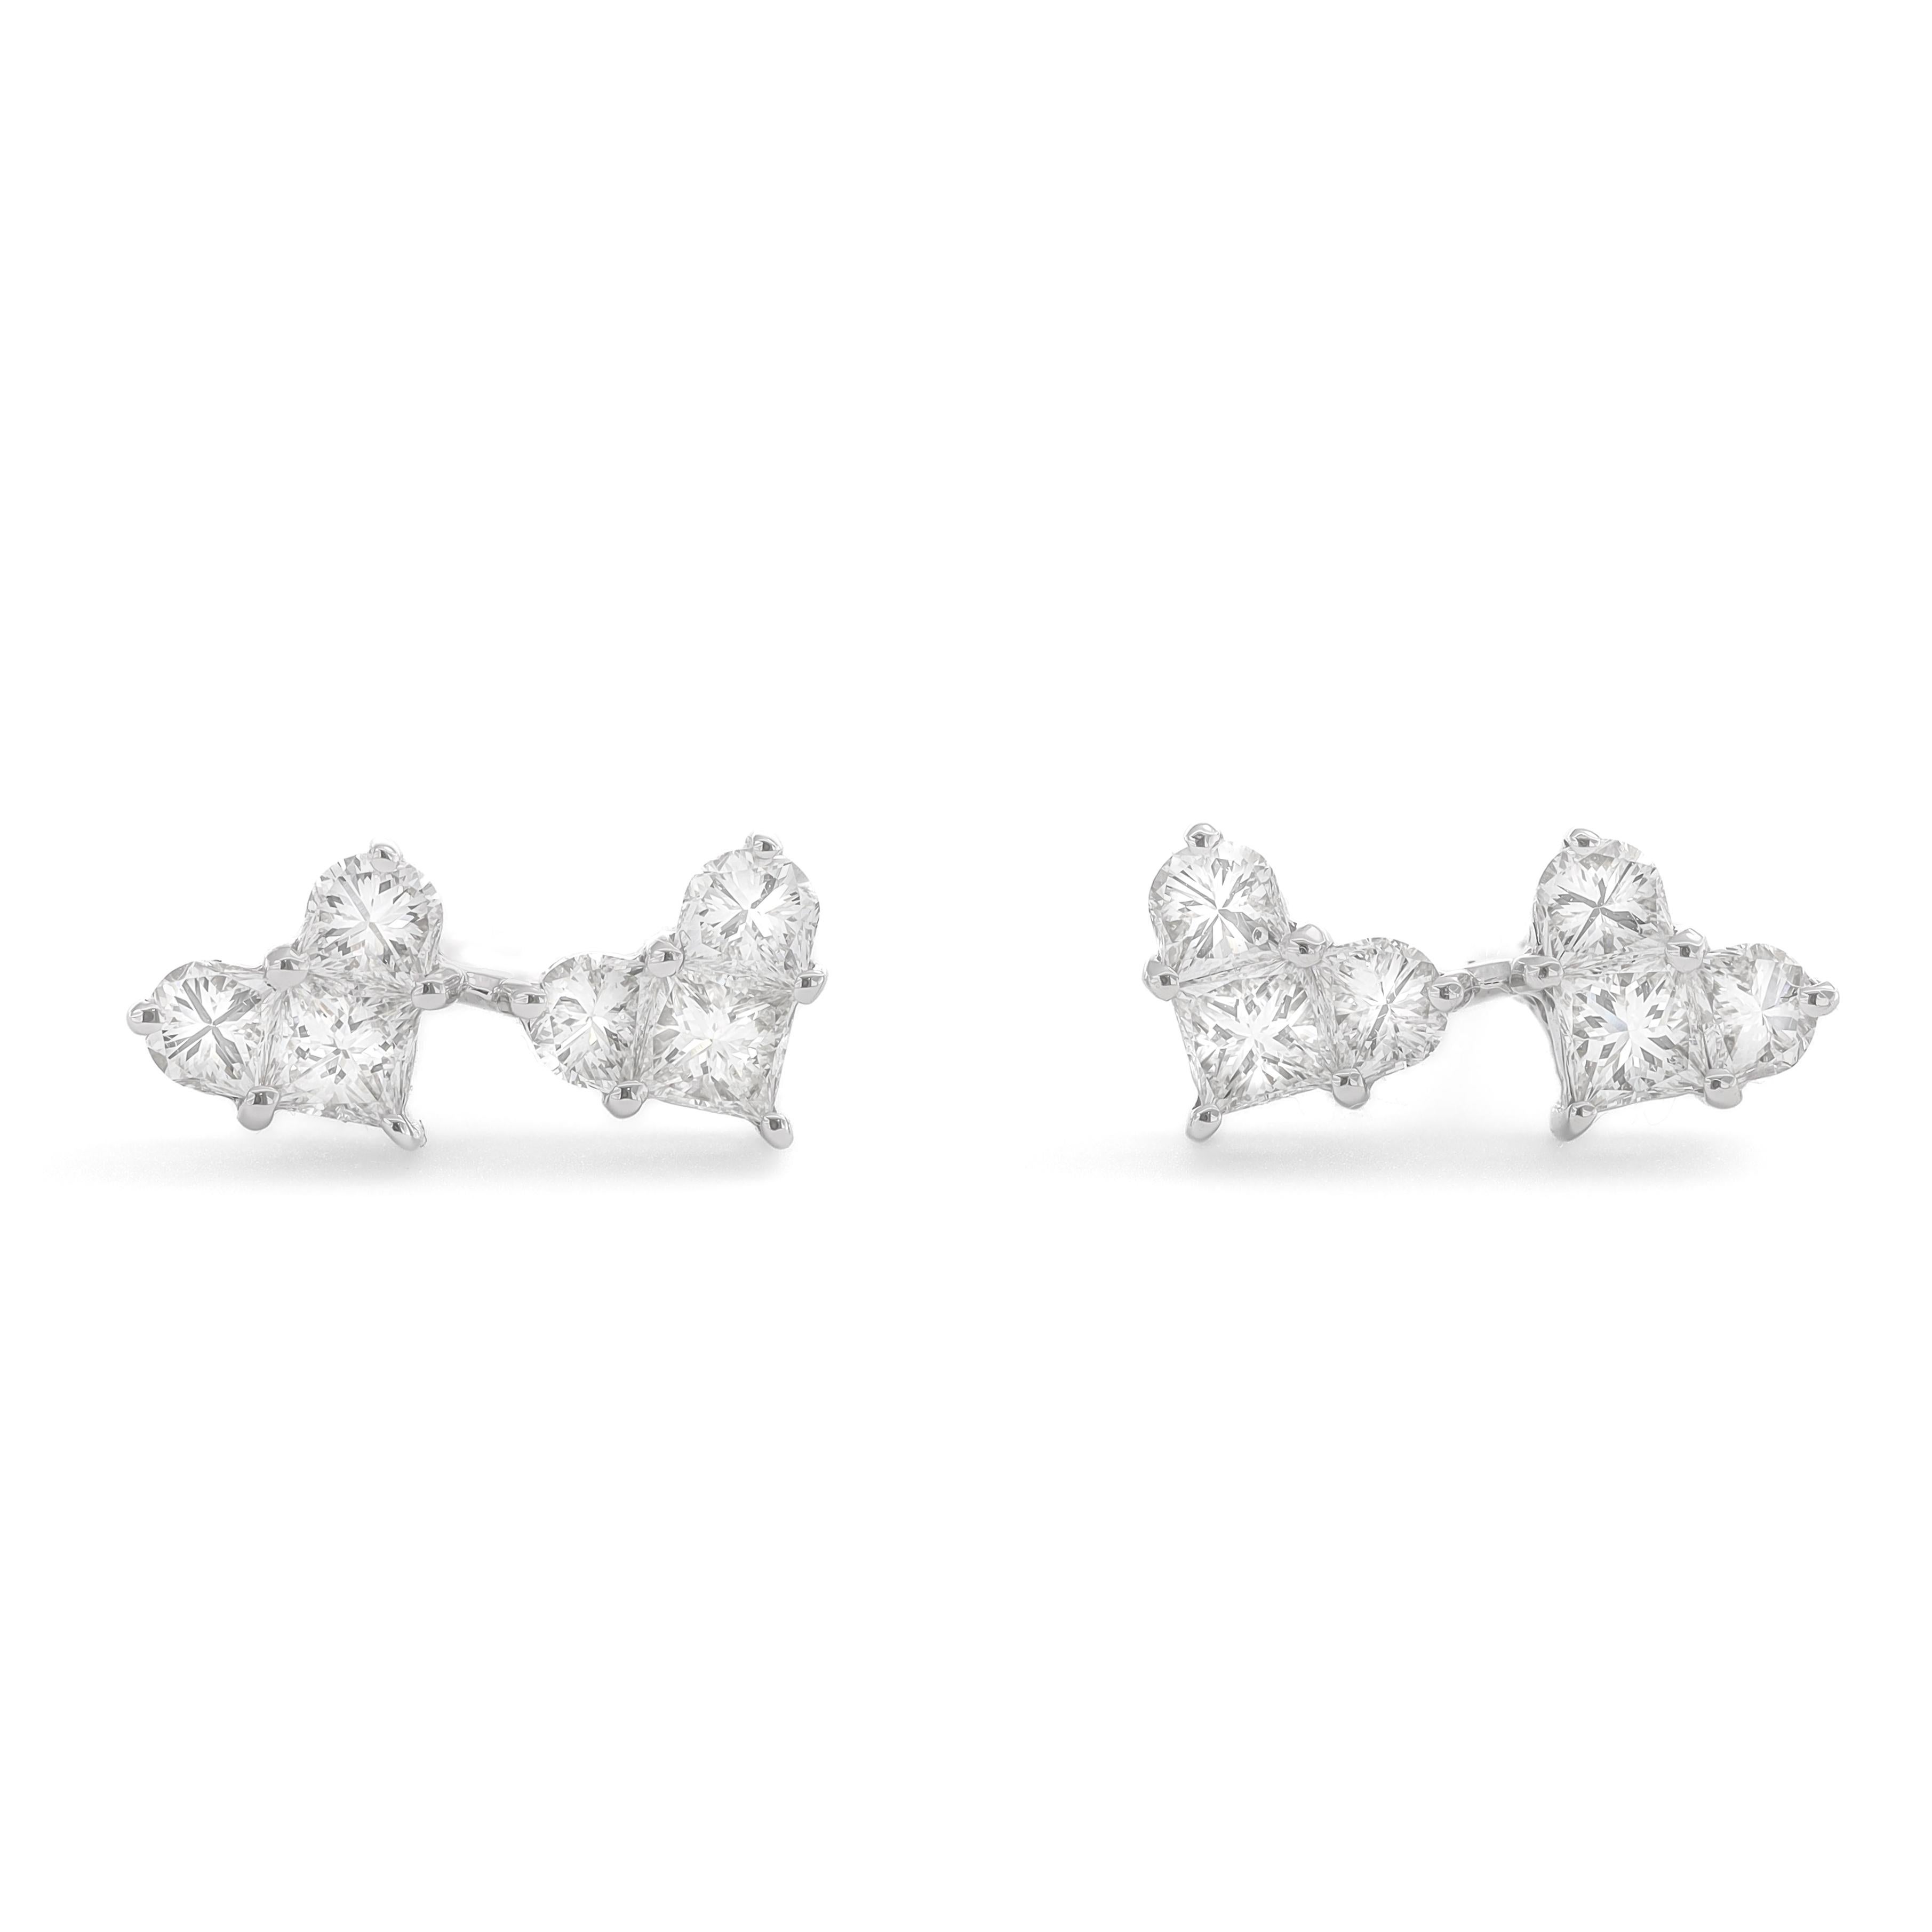 Impeccably crafted with meticulous precision, these stunning earrings boast a captivating design featuring a delicate cluster of two heart shapes, symbolizing love and unity. Each earring is adorned with a total of 0.85 carats of diamonds set in